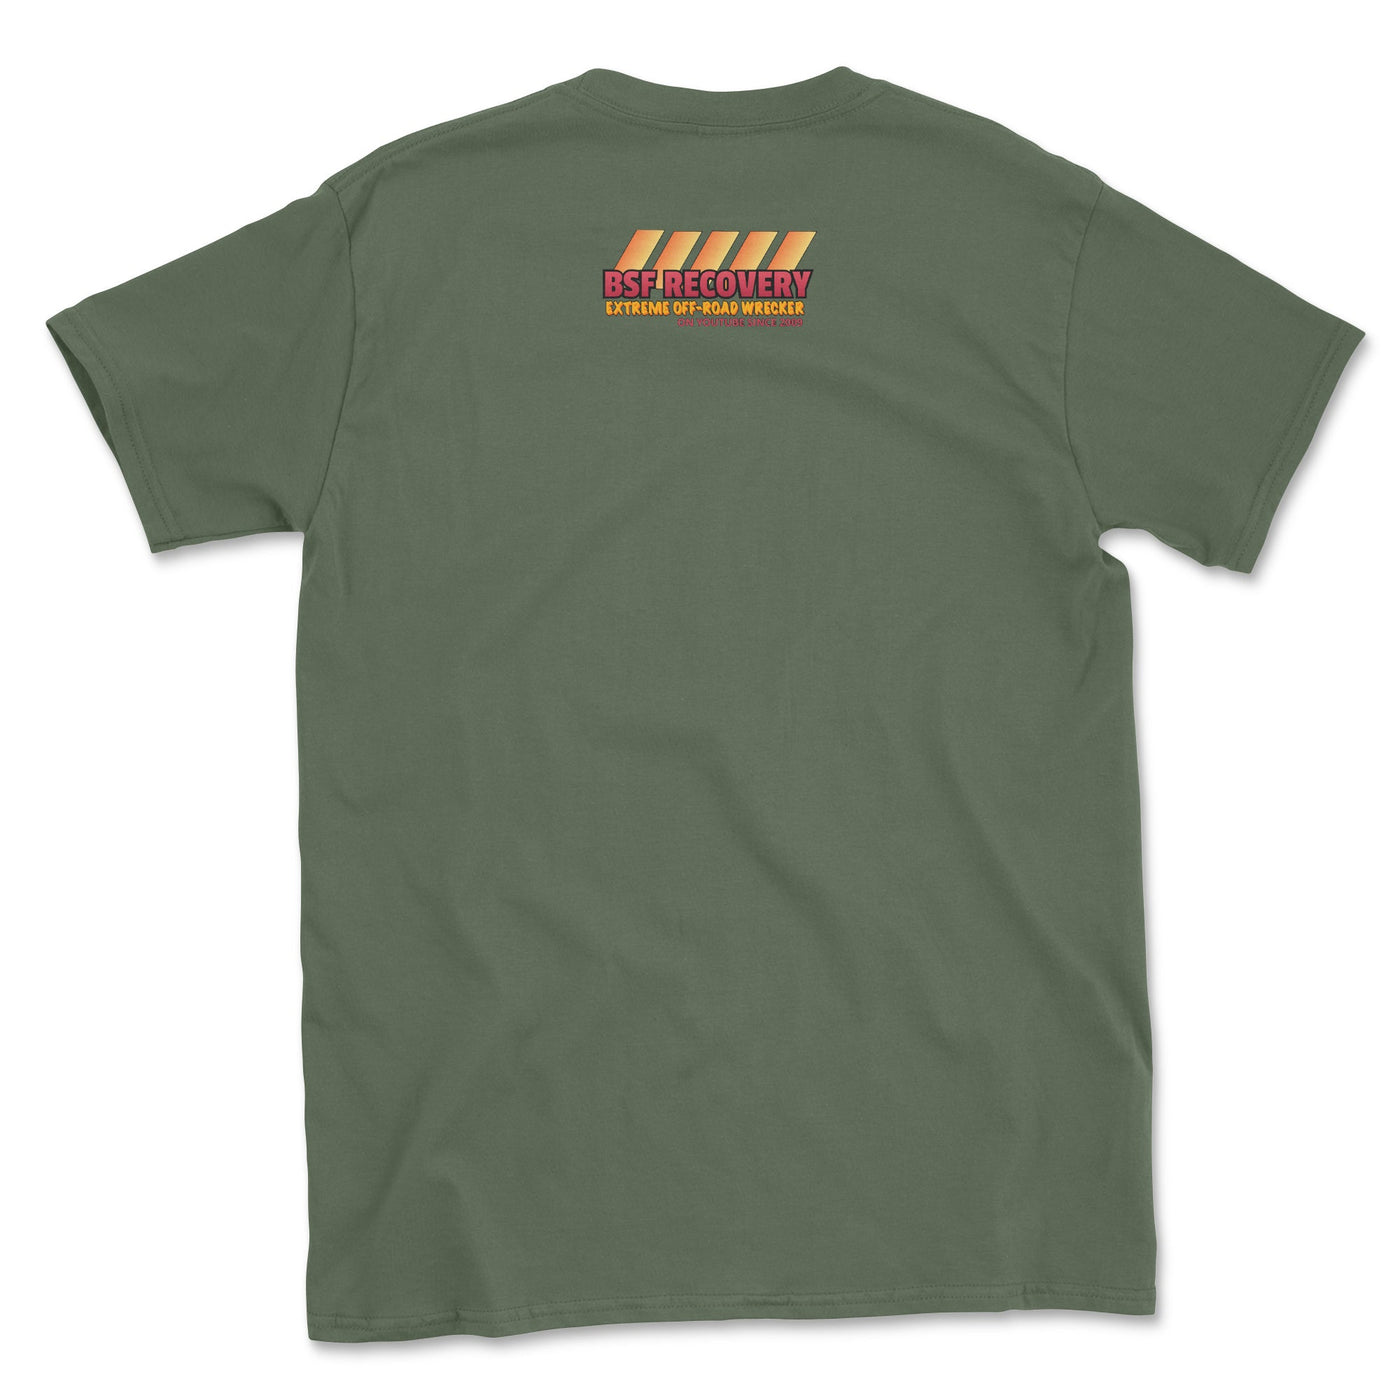 BSF Blondie Off-Road Wrecker Tee - Goats Trail Off-Road Apparel Company